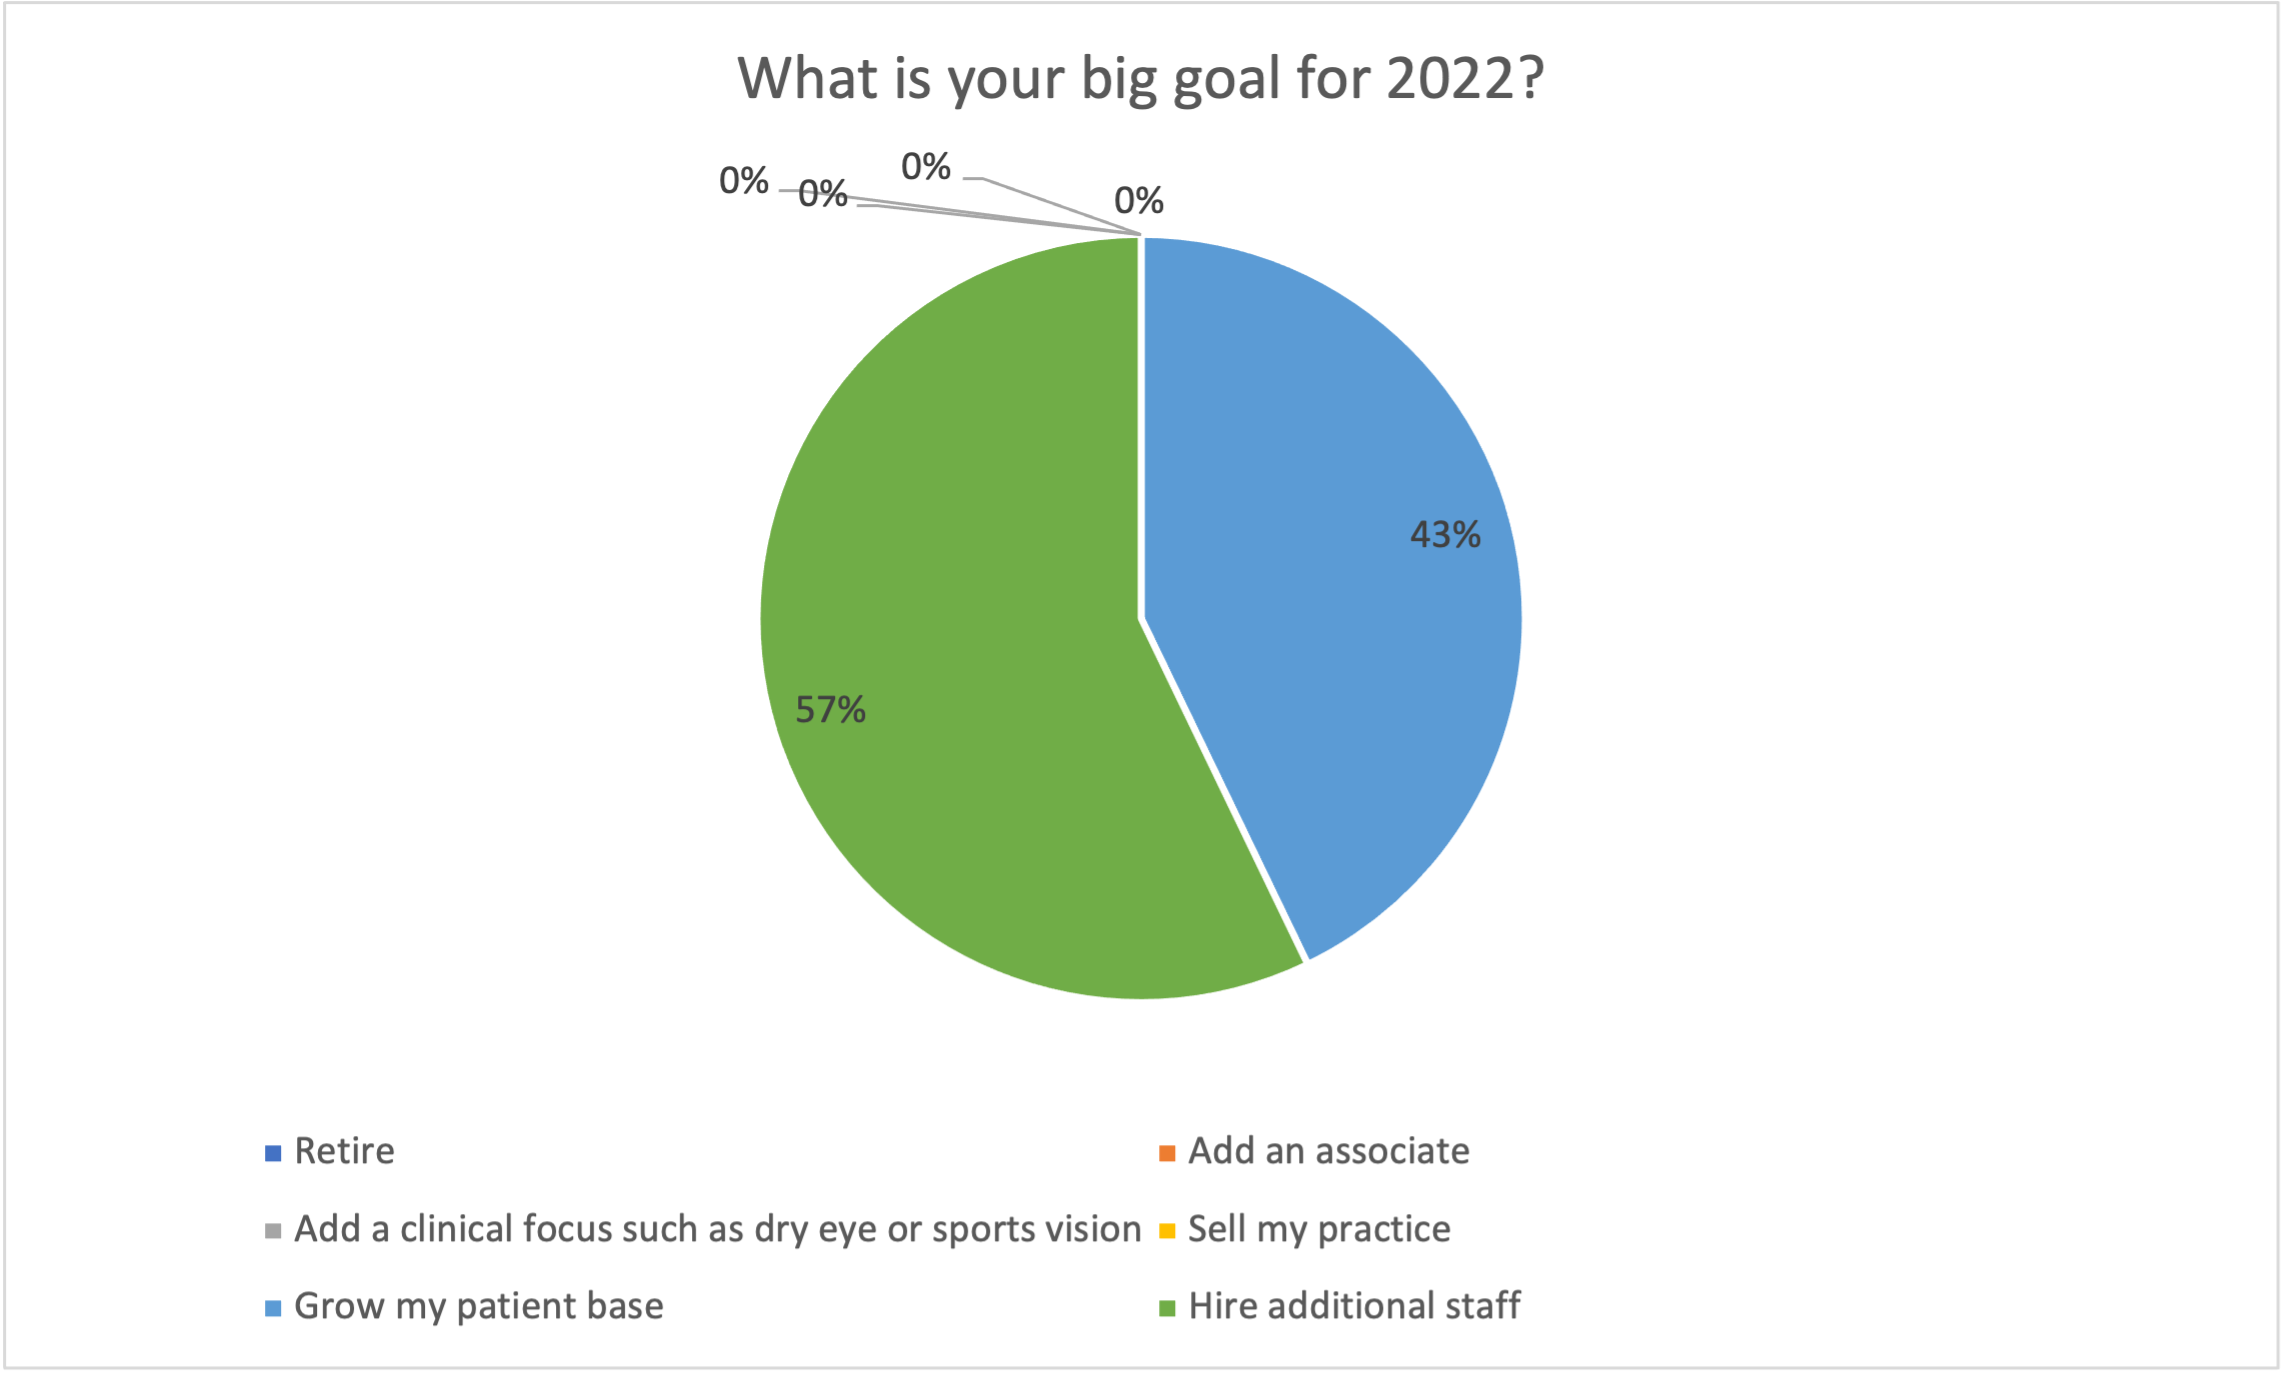 Poll results: What is your big goal for 2022?